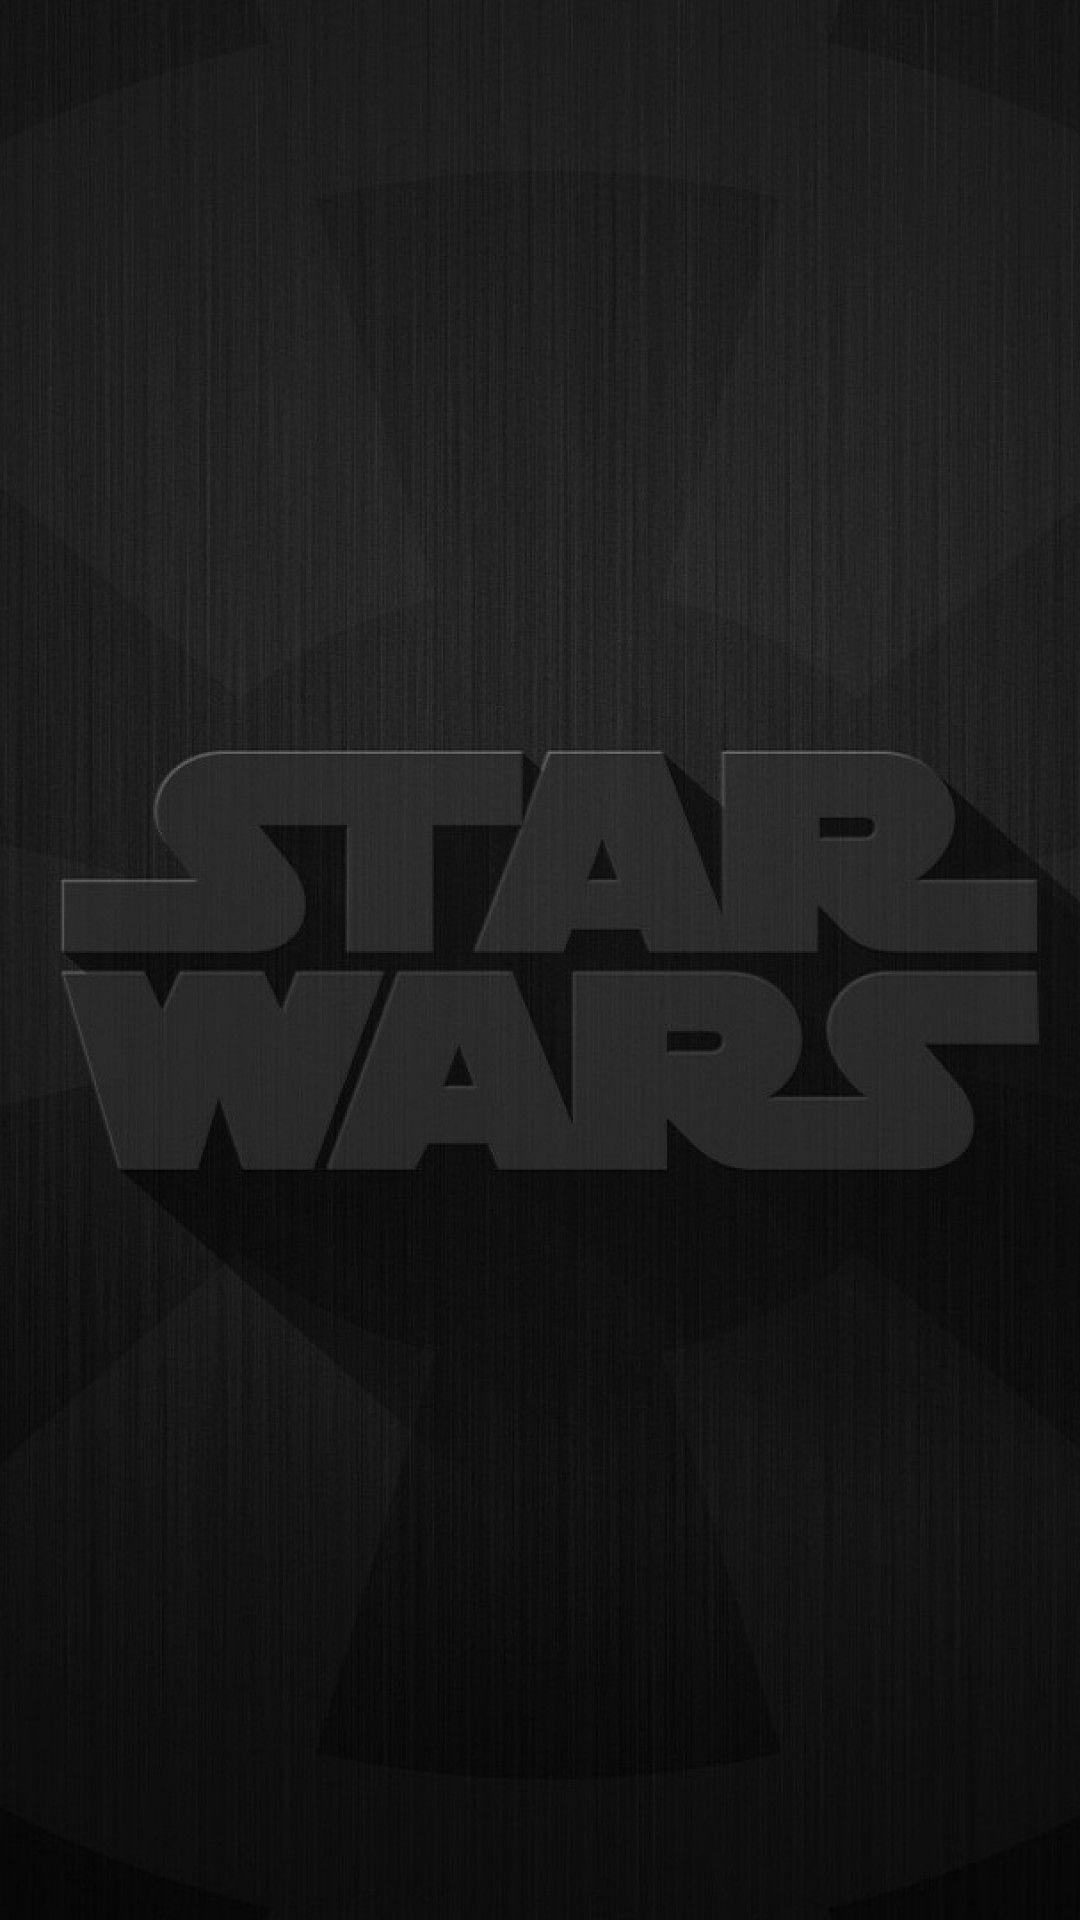 Star Wars background. the Force is strong. Star